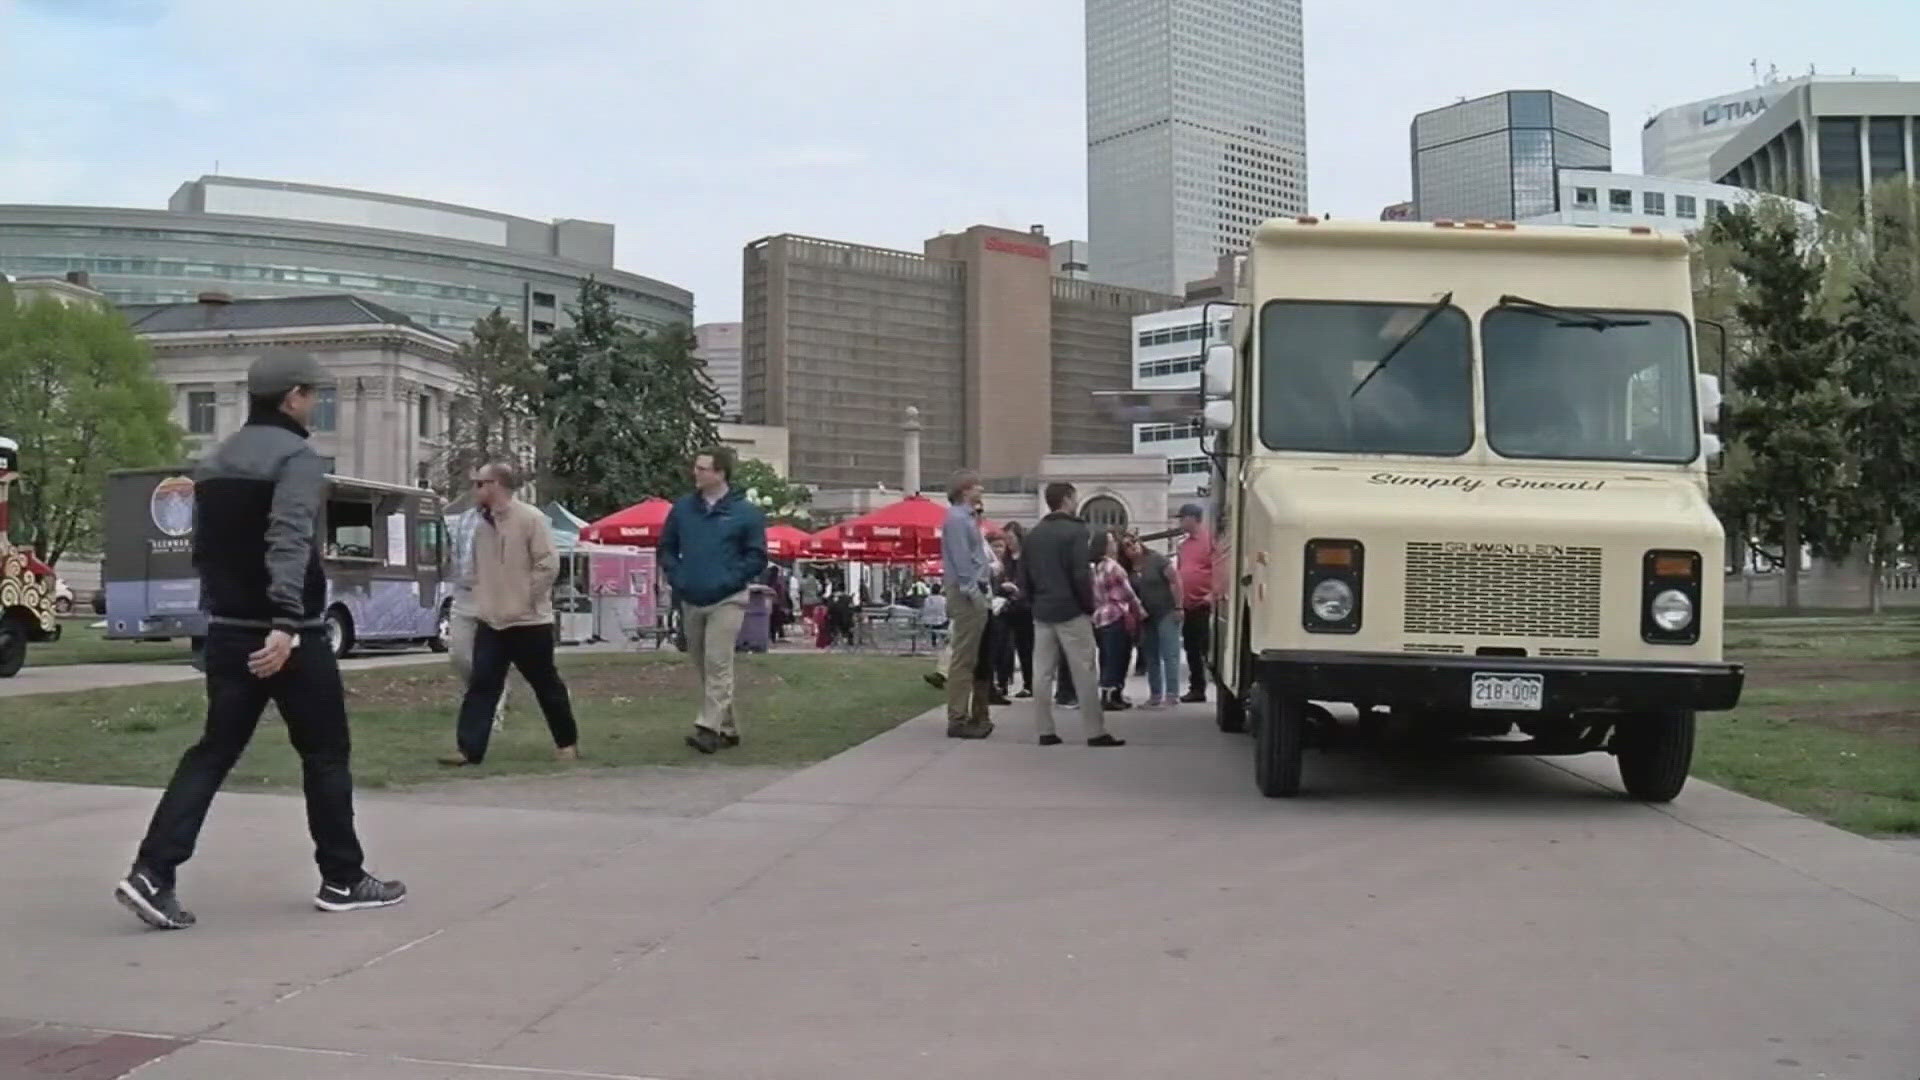 Civic Center EATS is returning to downtown Denver this week.